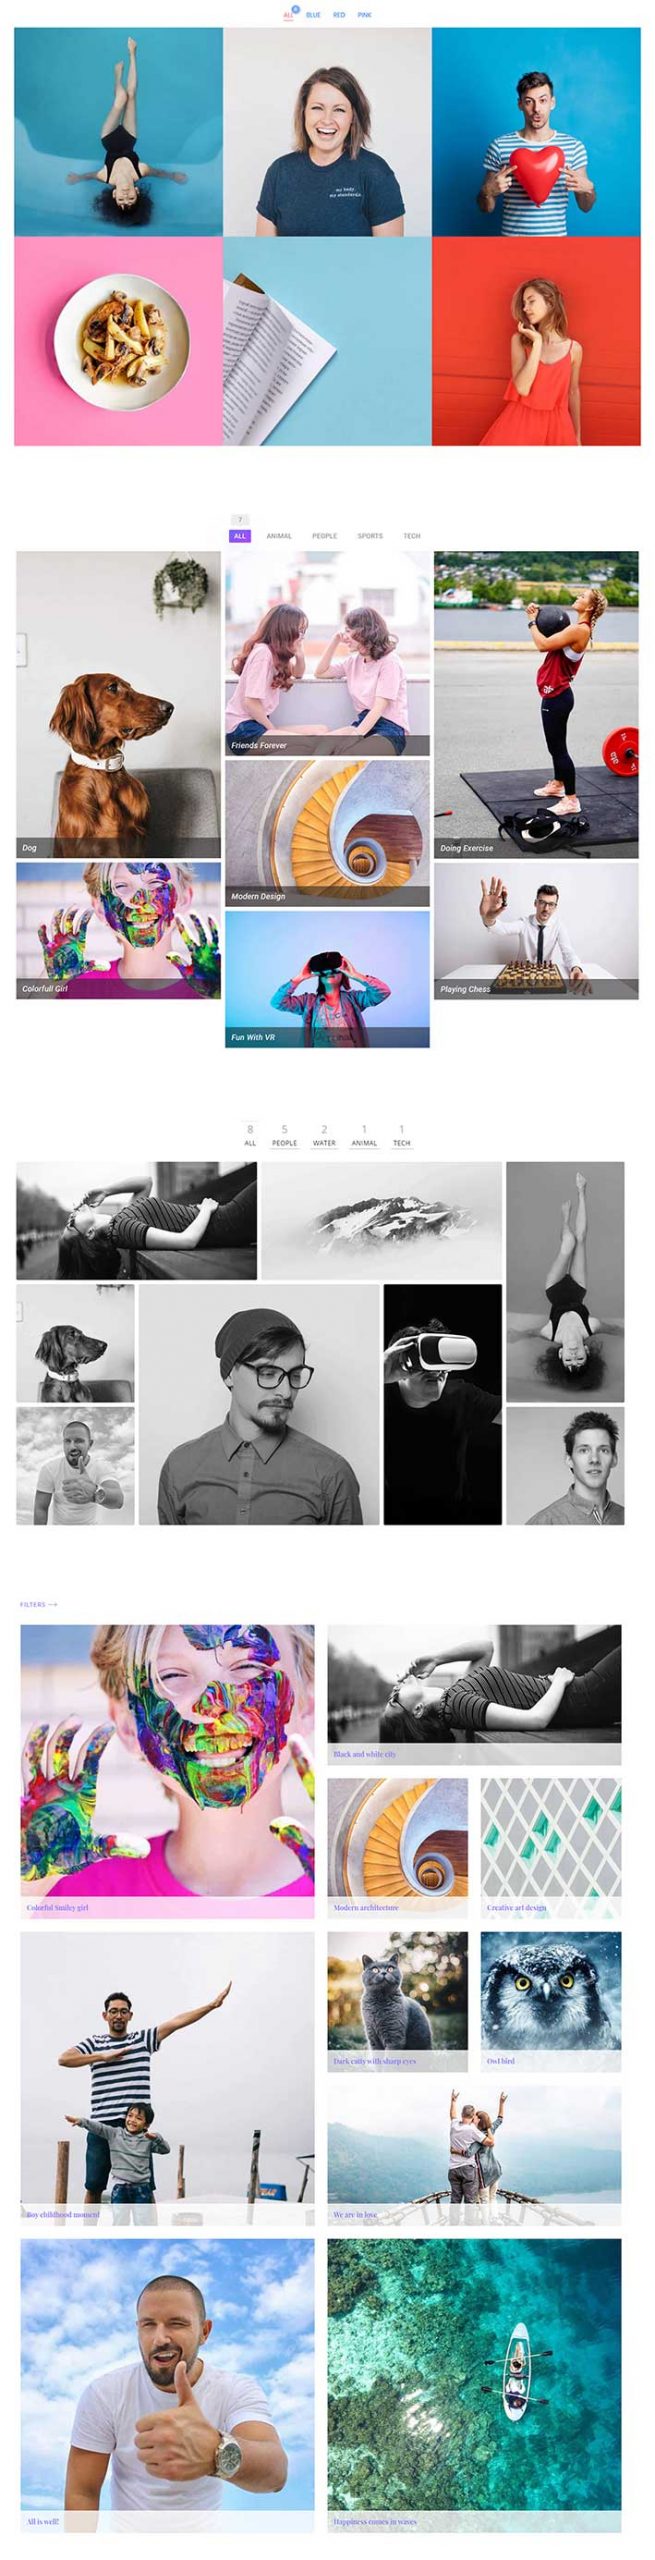 Image Gallery / Portfolio Widget by The Plus Addons for Elementor